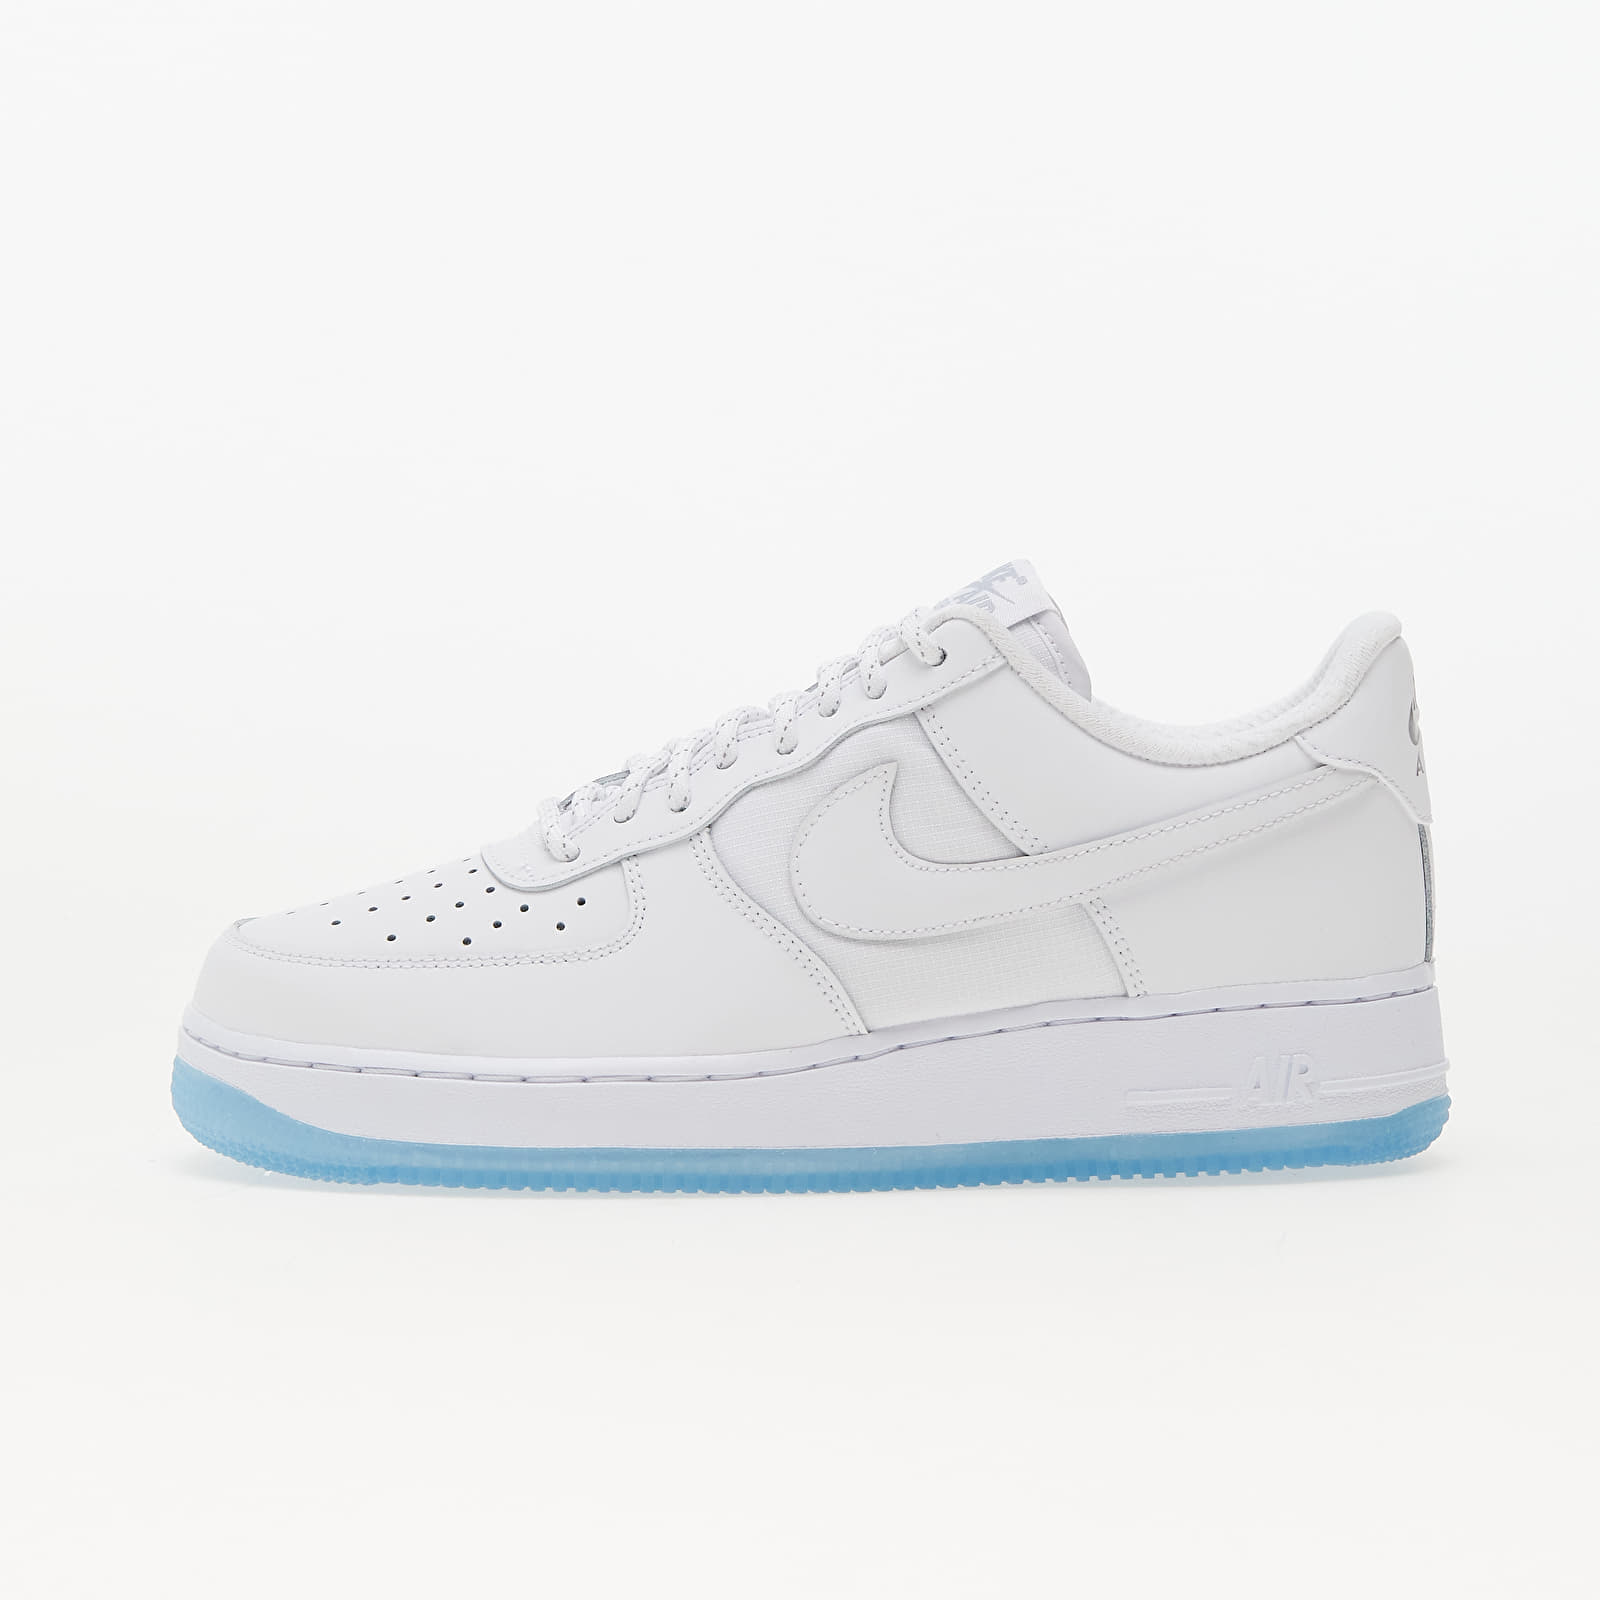 Chaussures et baskets homme Nike Air Force 1 '07 White/ White-Reflect Silver